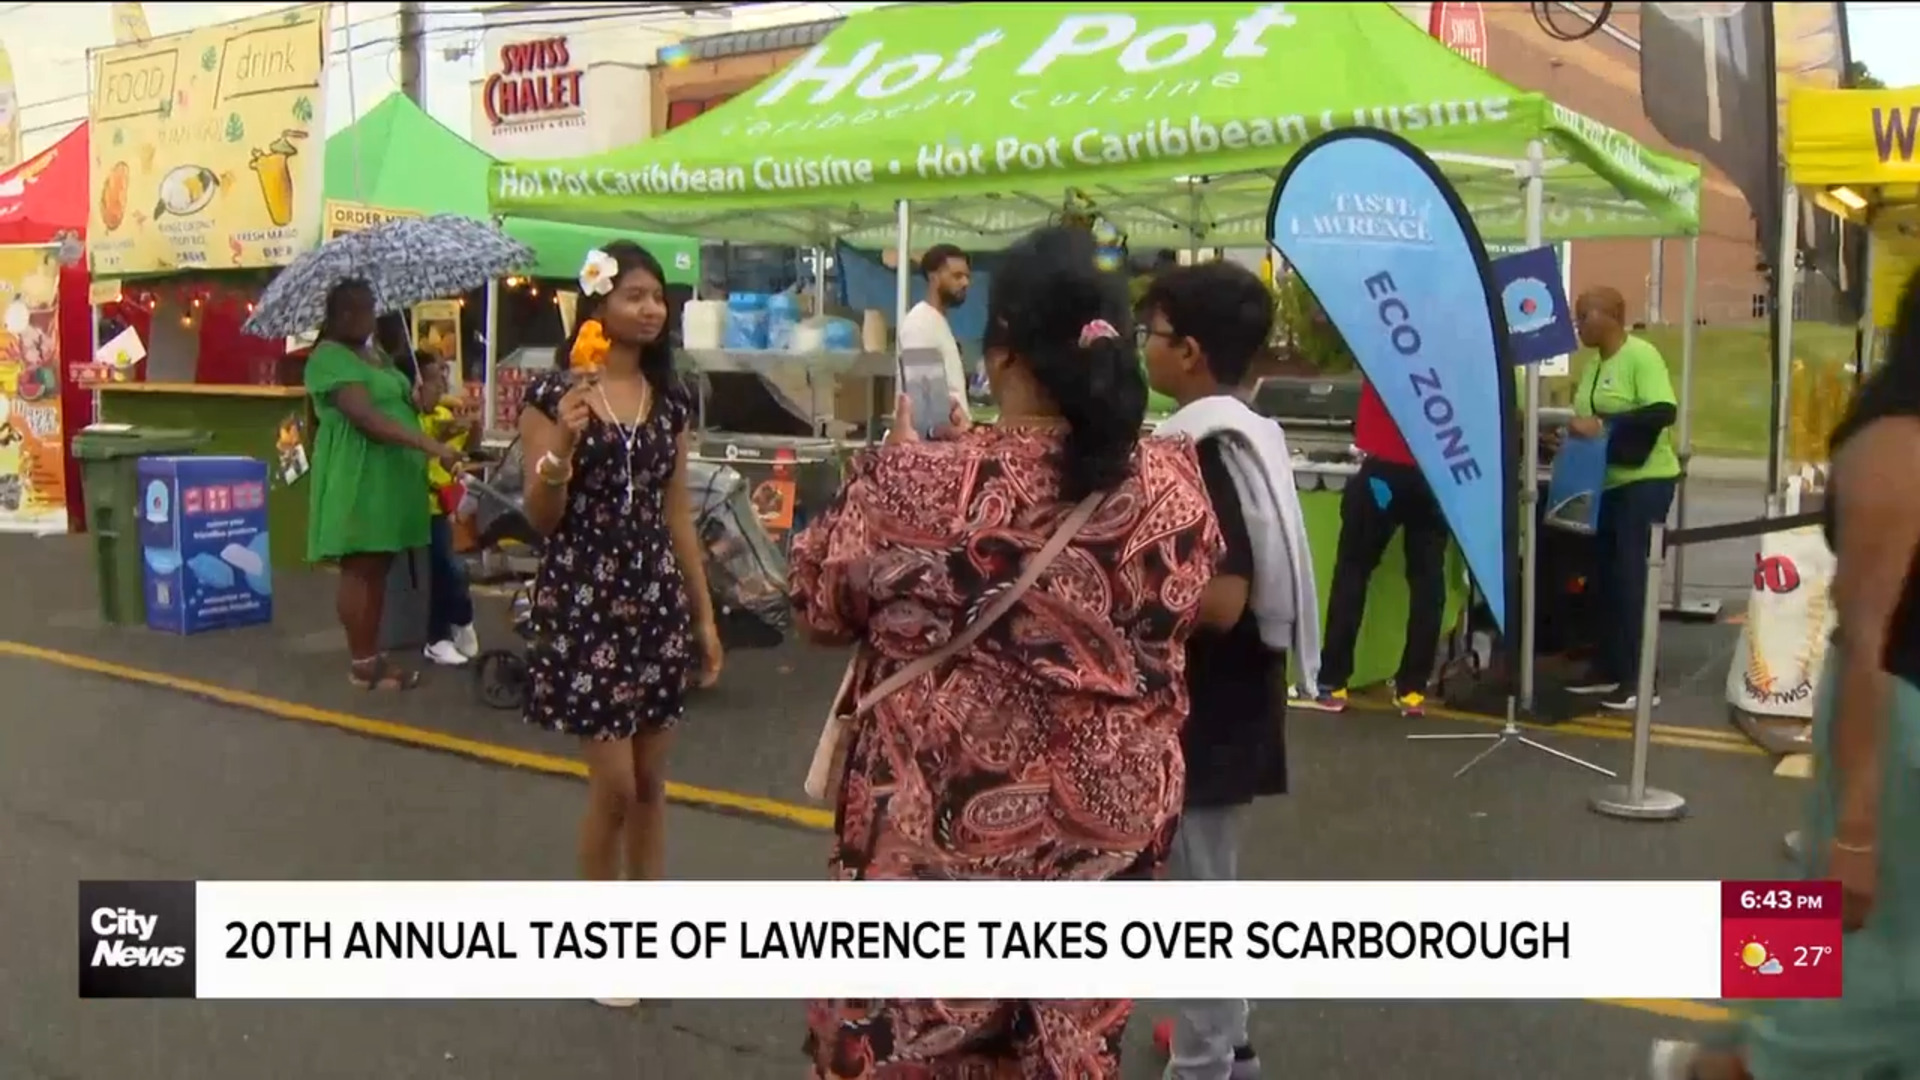 Residents celebrate 20th annual Taste of Lawrence in Scarborough